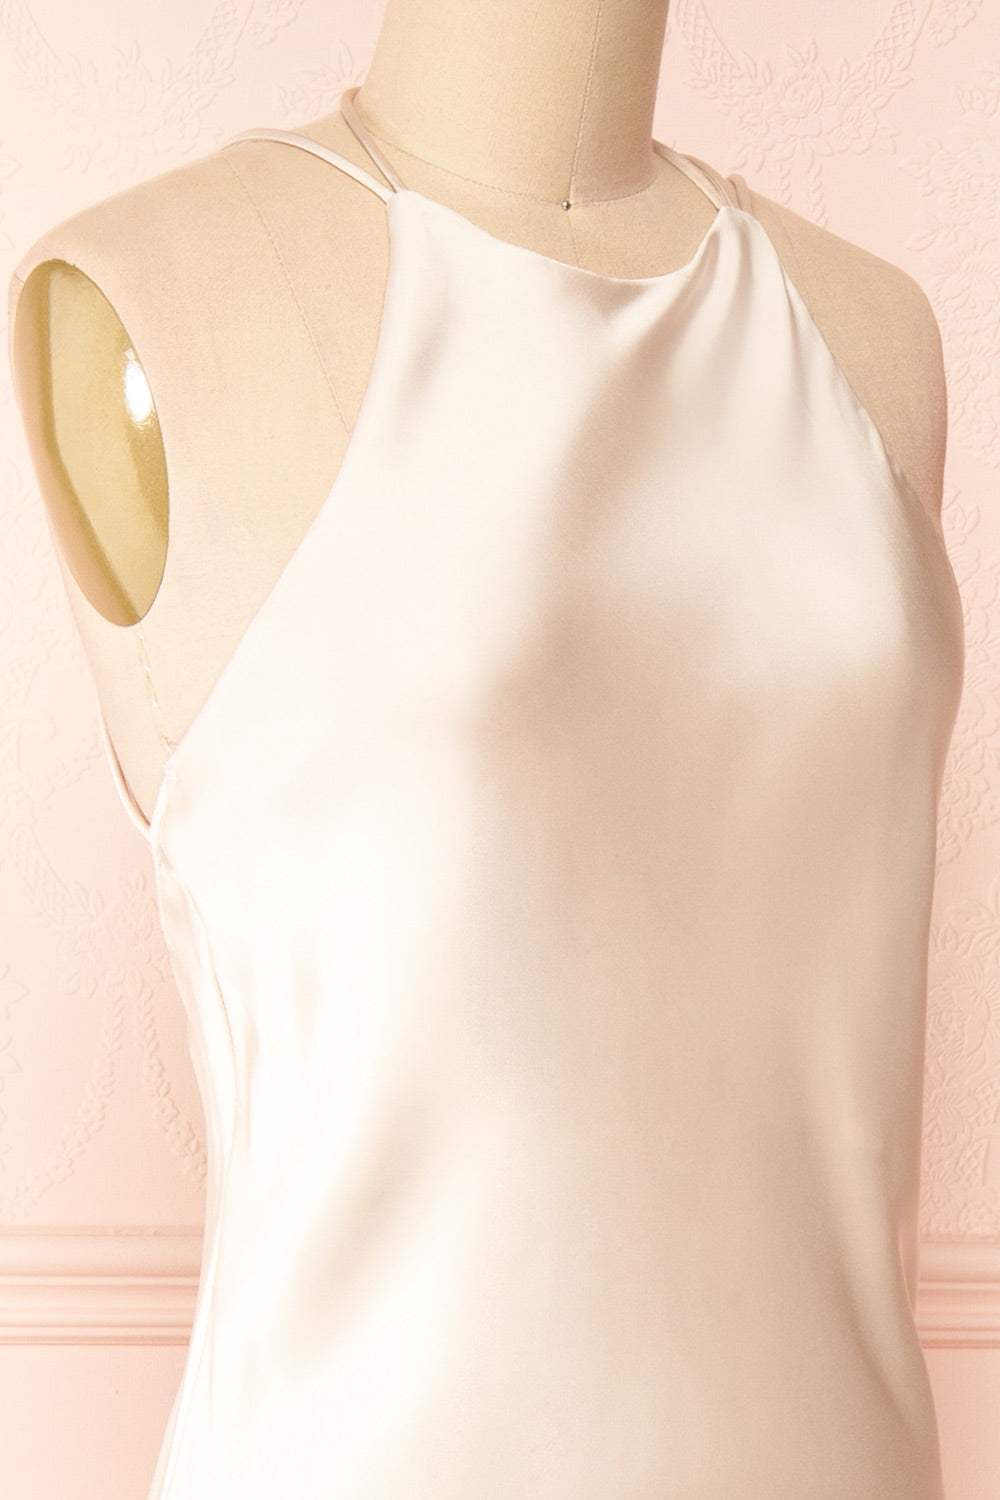 Nairobi Champagne Satin Maxi Dress w/ Open Back | Boutique 1861  side close-up